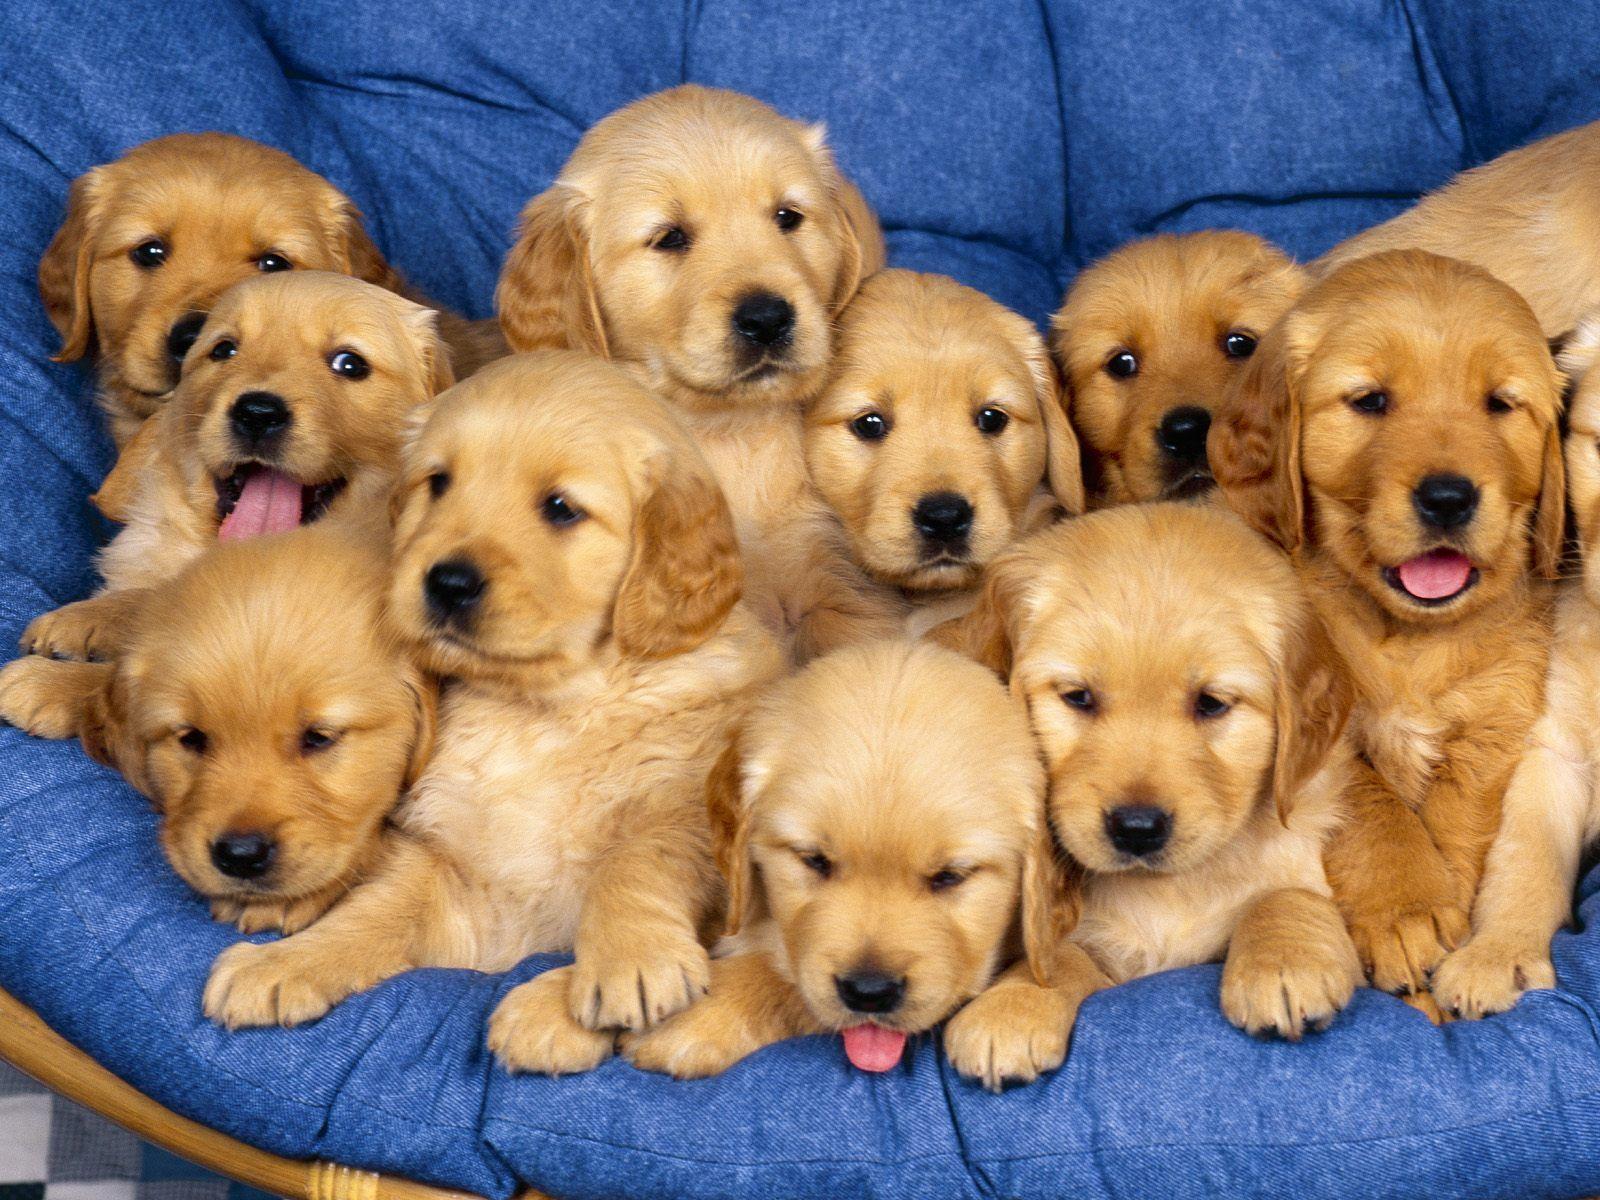 Download Free Dogs Wallpaper 1920x1080 px for PC & Mac, Laptop